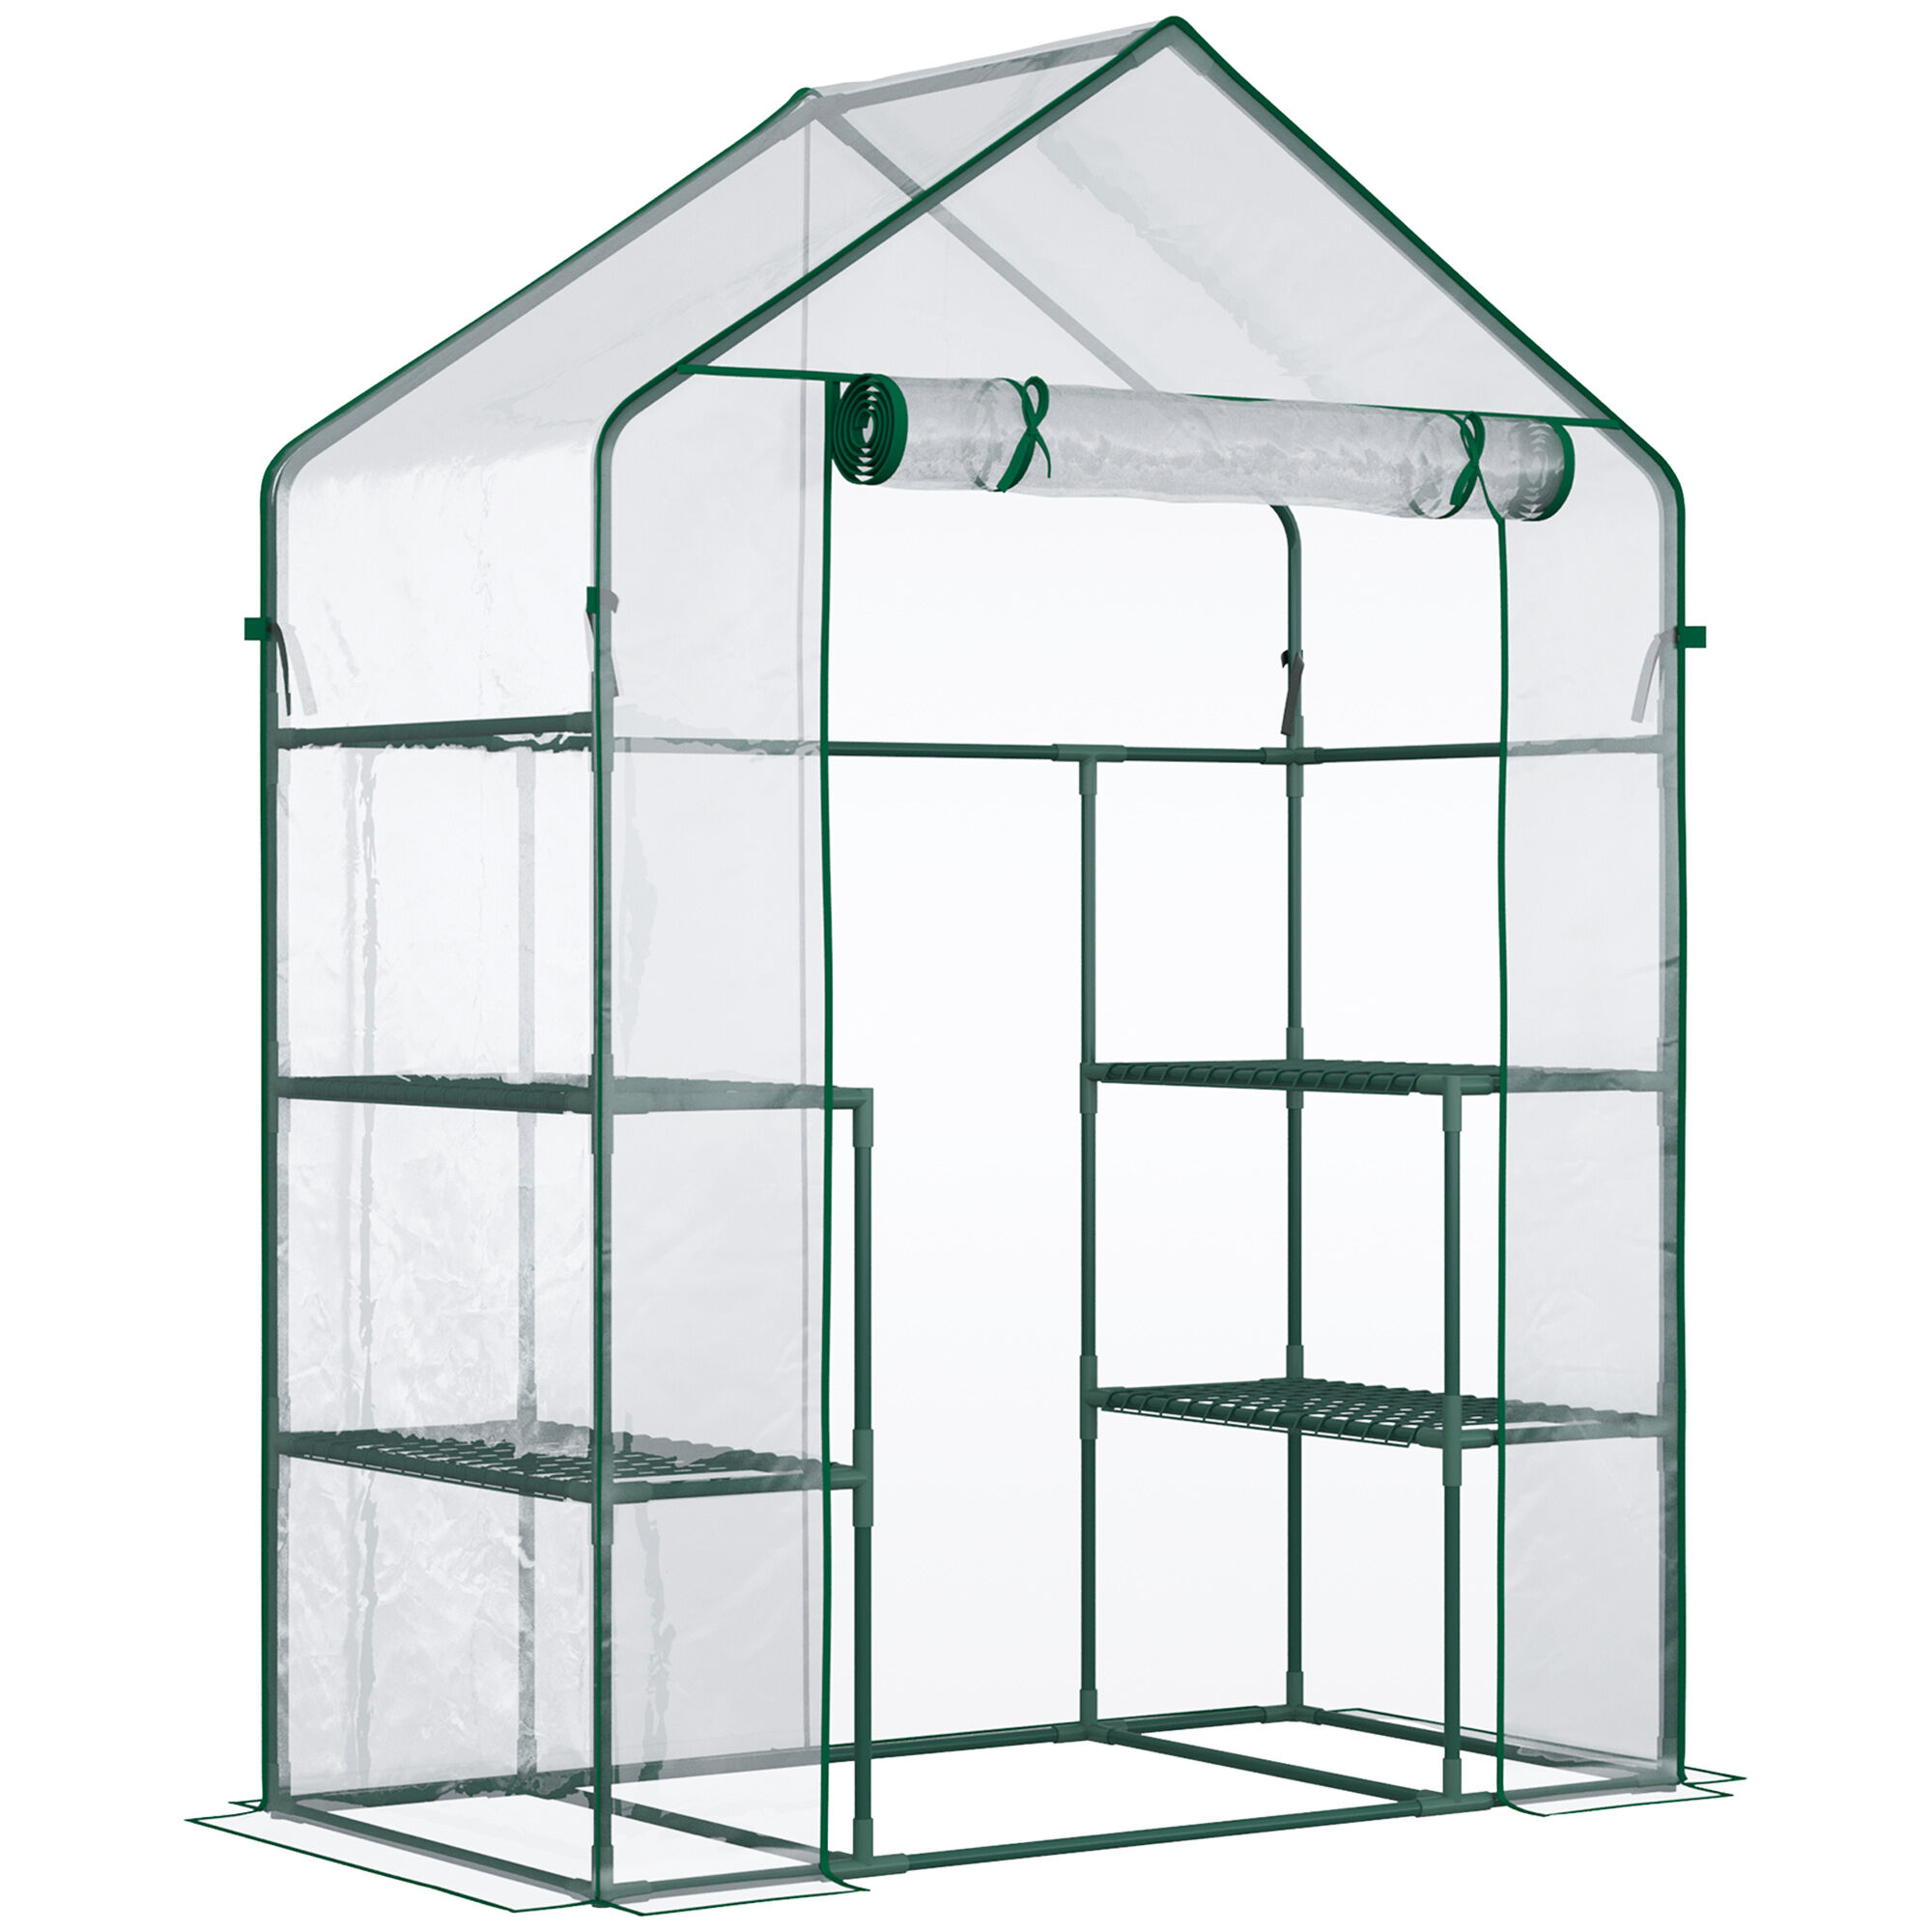 Outsunny Mini Greenhouse 56 x 29 x 77 Walk-in Garden Hot House with Shelves Roll-Up Door Weatherized Cover Deep Green   Aosom.com